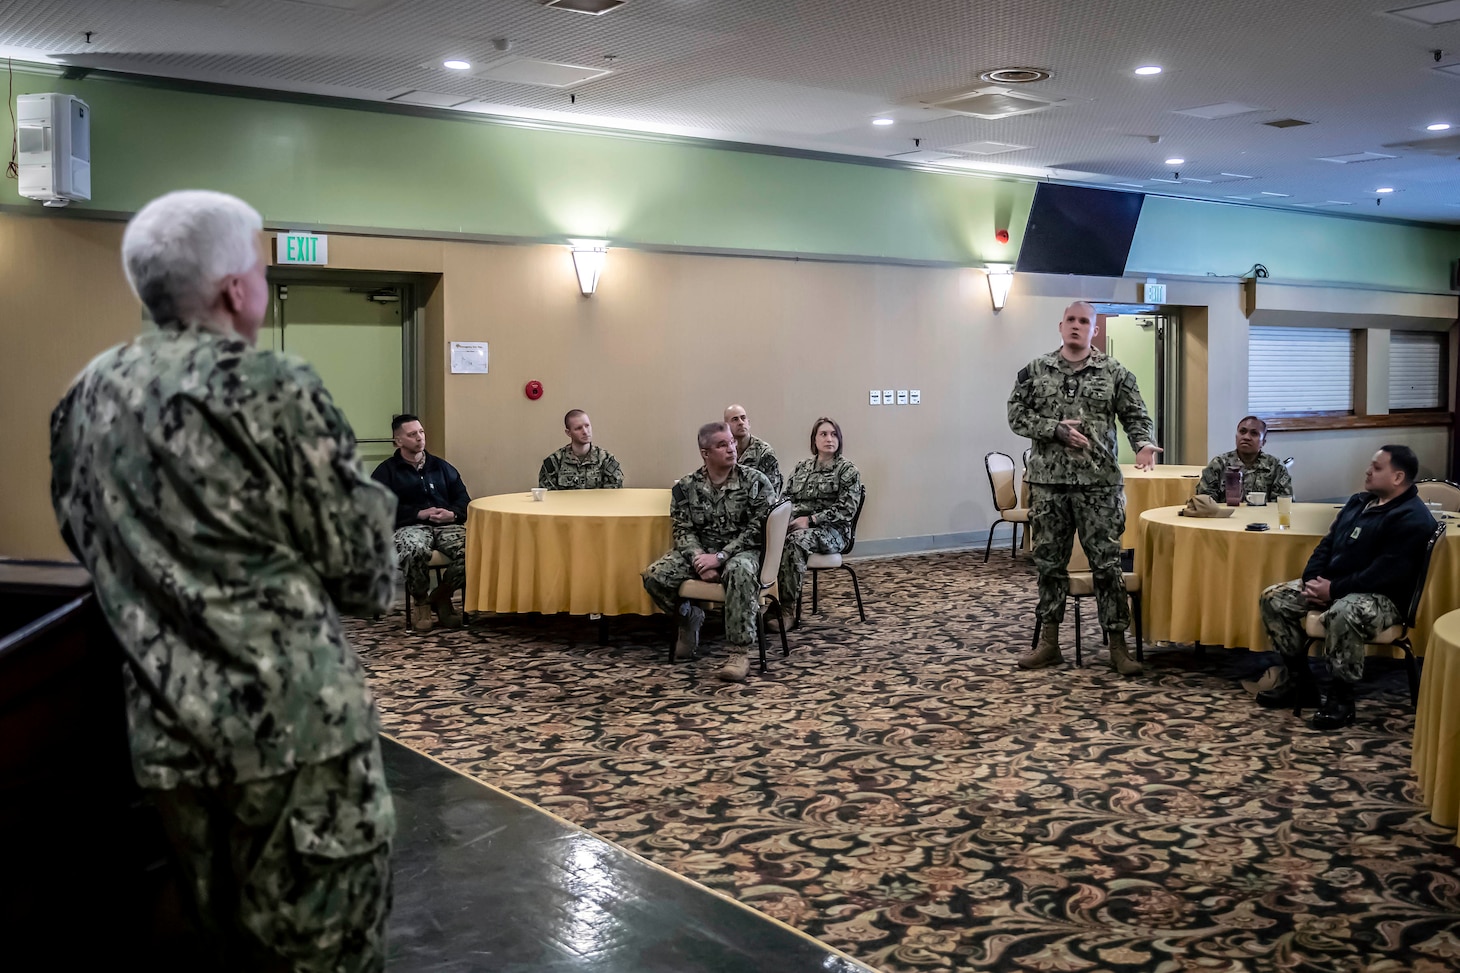 220405-N-MM501-1048 YOKOSUKA, Japan (April 5, 2022) Cryptologic Technician (Collection) 1st Class Mark Lewis, from King George, Virginia, U.S. 7th Fleet Sea Sailor of the Year candidate, speaks with Commander, U.S. 7th Fleet, Vice Adm. Karl Thomas during the opening remarks of the 7th Fleet SOY Week, April 5. U.S. 7th Fleet conducts forward-deployed naval operations in support of U.S. national interests in the Indo-Asia-Pacific area of operations. As the U.S. Navy’s largest numbered fleet, 7th Fleet interacts with 35 other maritime nations to build maritime partnerships that foster maritime security, promote stability, and prevent conflict. (U.S. Navy photo by Mass Communication Specialist 2nd Class Shannon Burns)